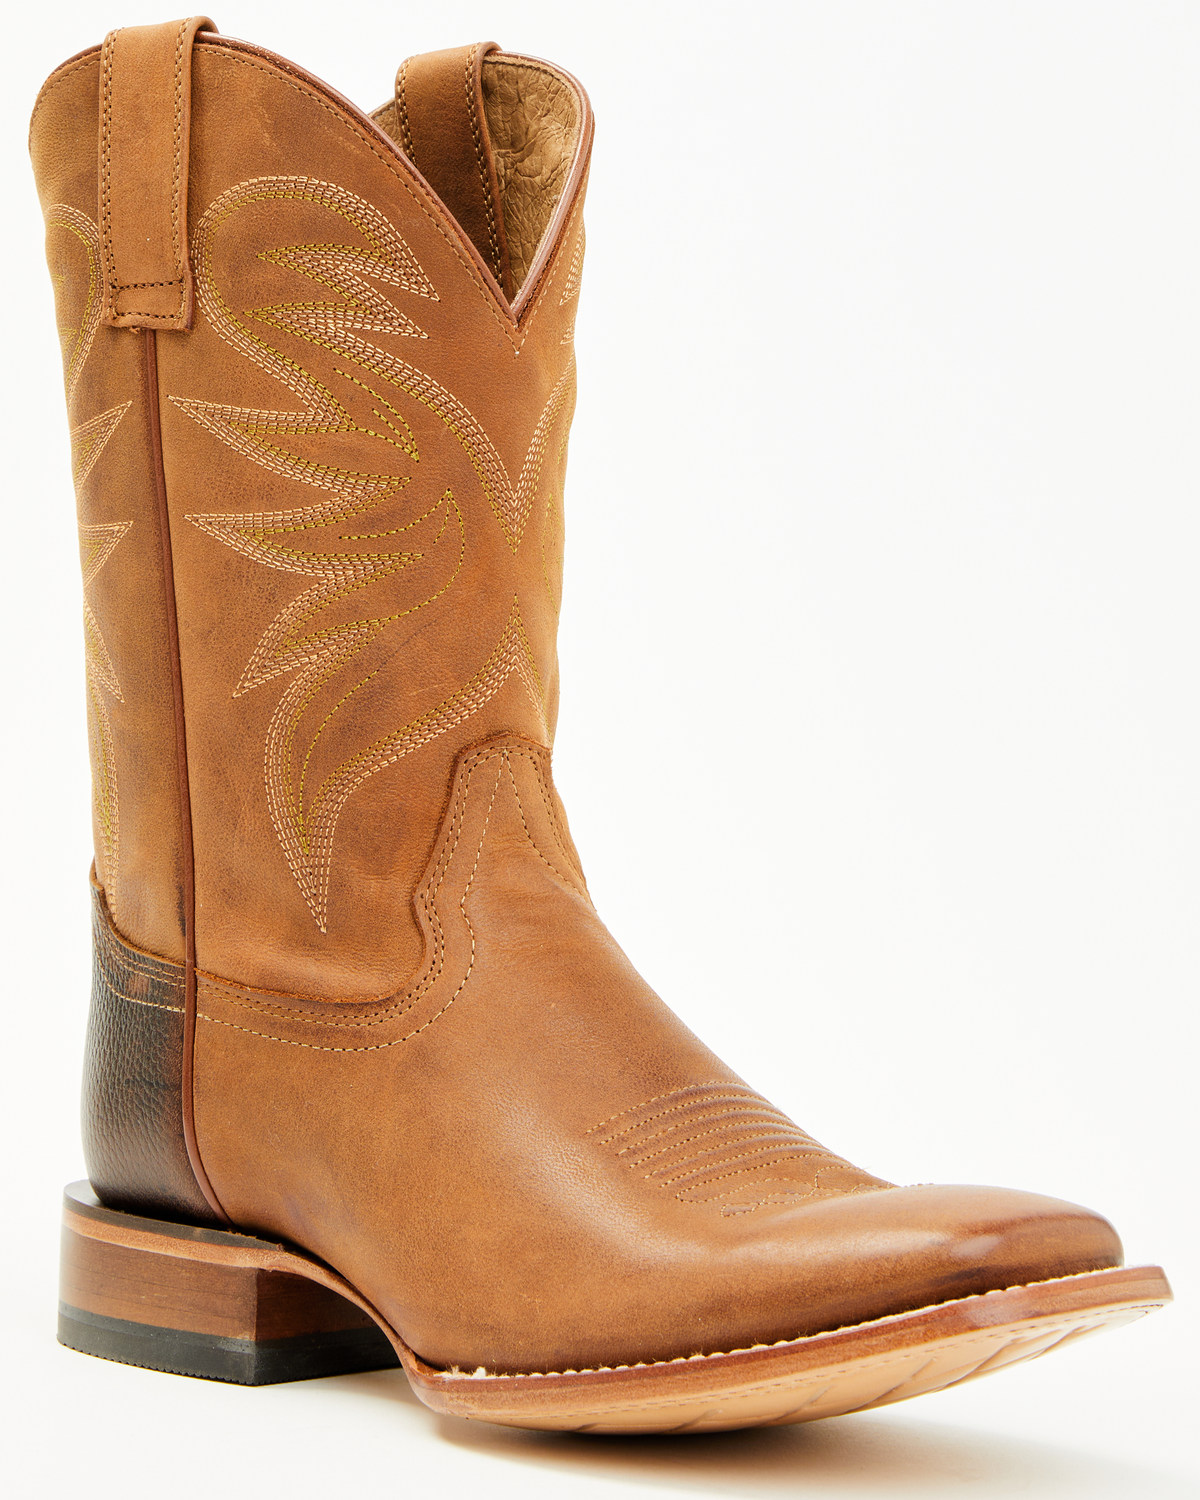 Cody James Men's McBride Roughout Western Boots - Broad Square Toe